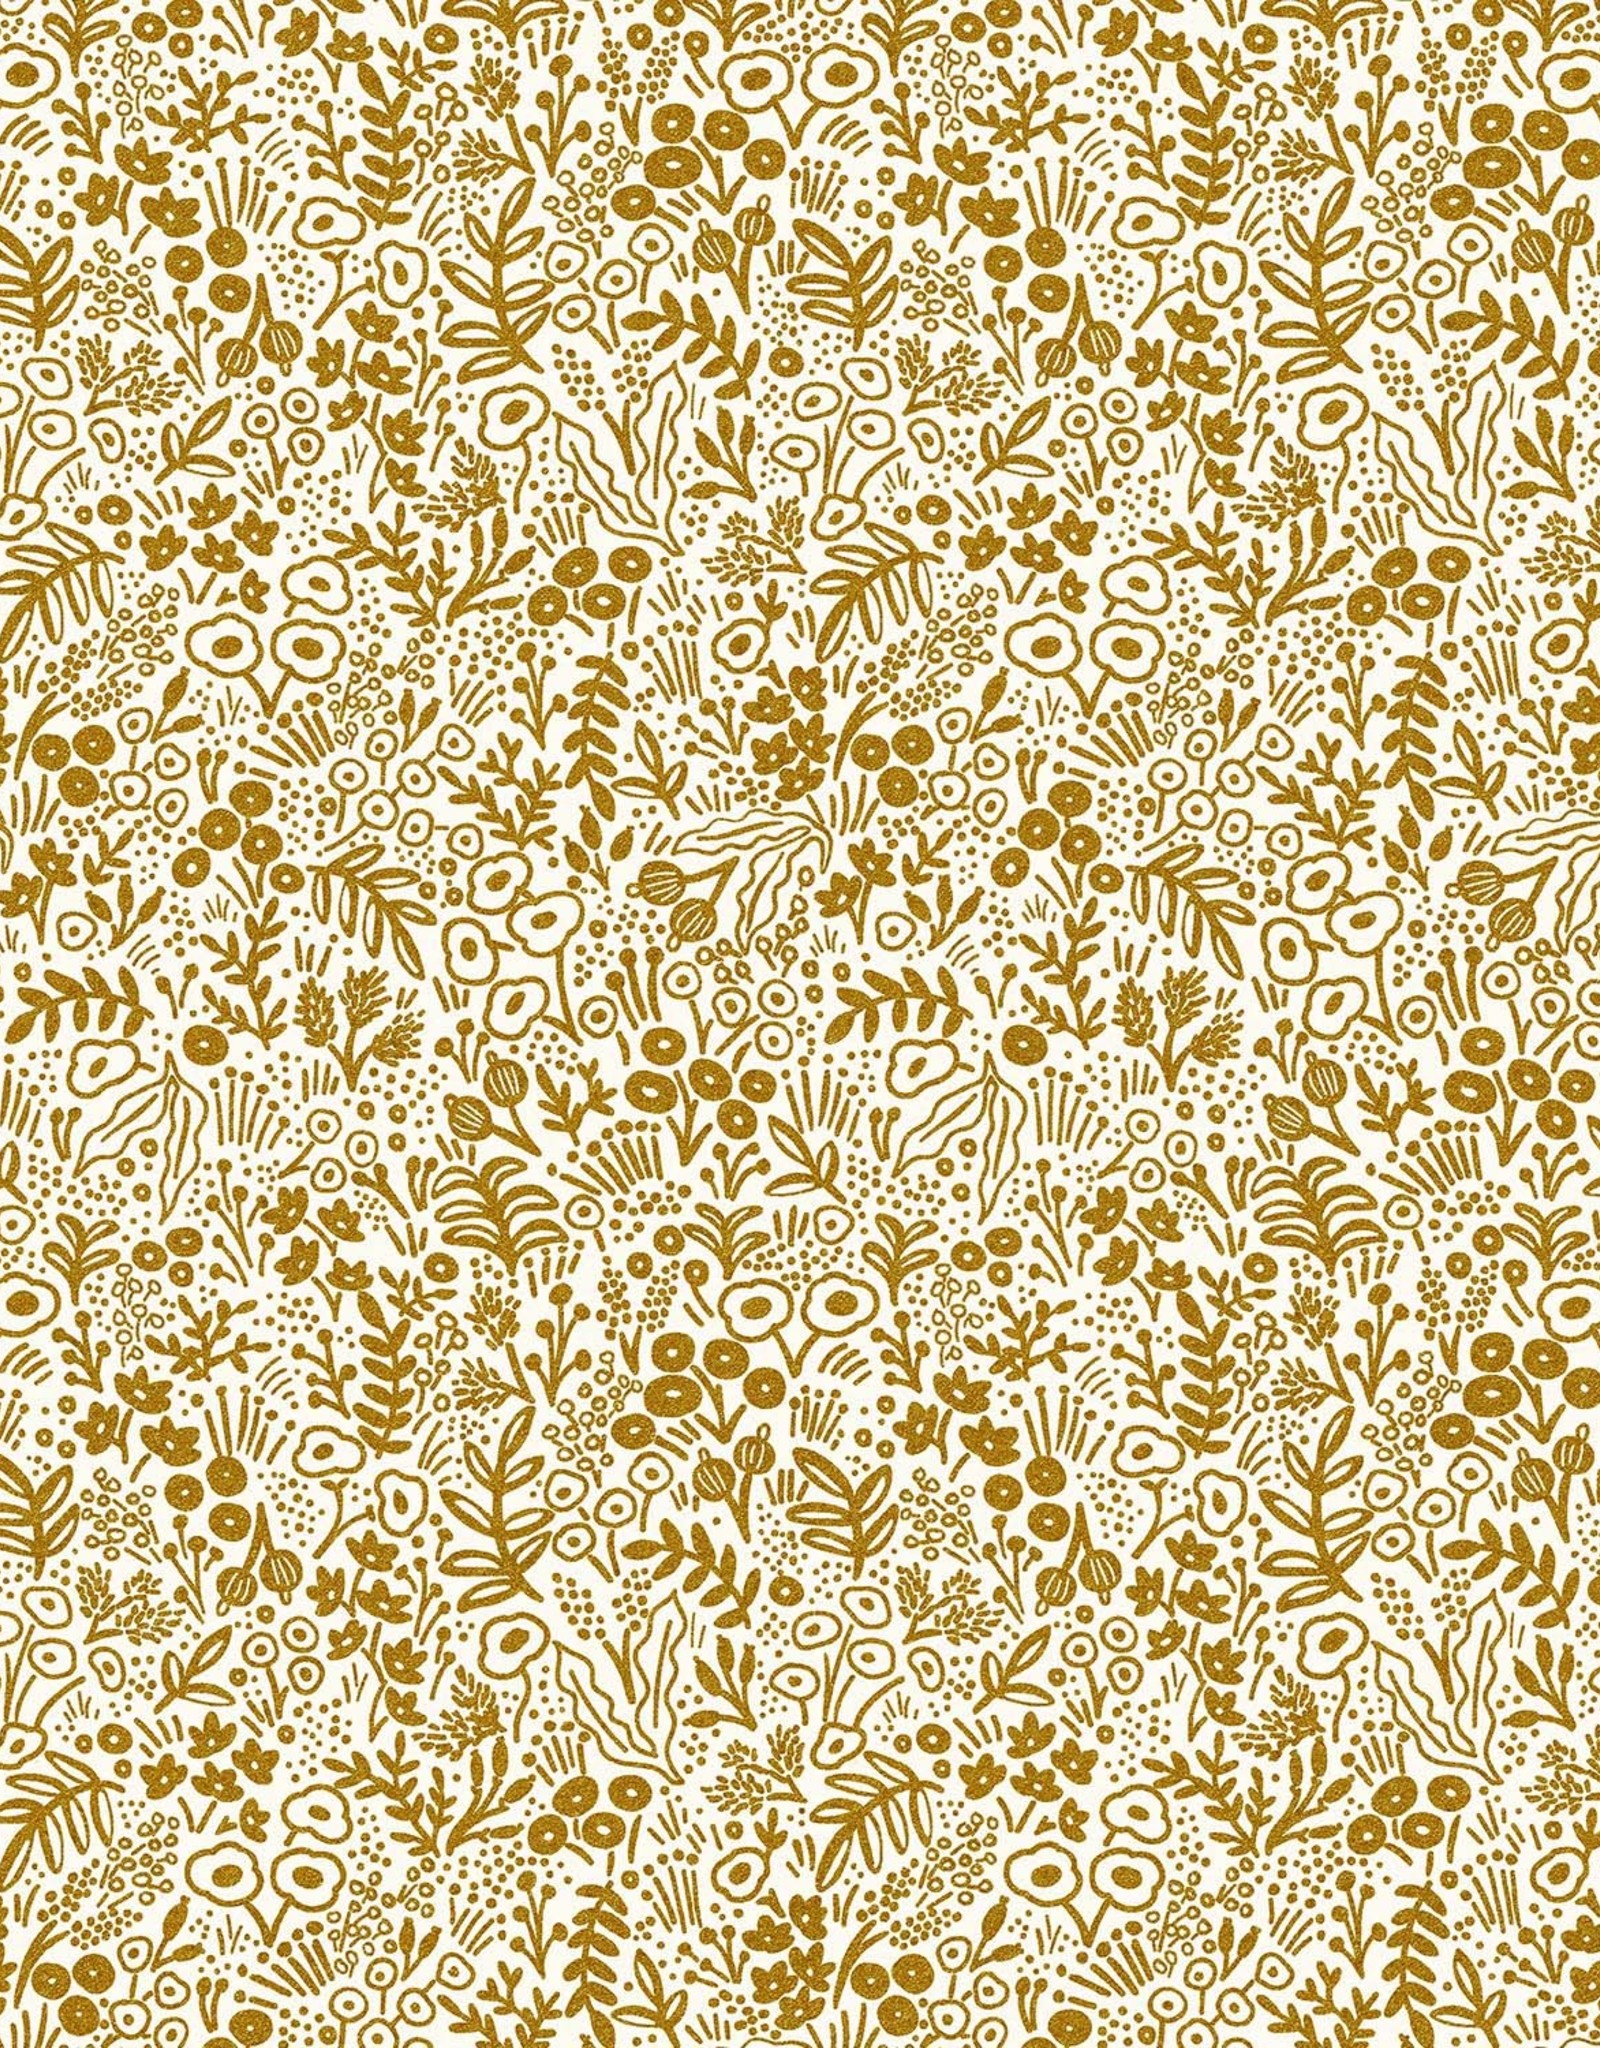 Cotton + Steel Rifle Paper Co. Basics Tapestry Lace Gold Metallic